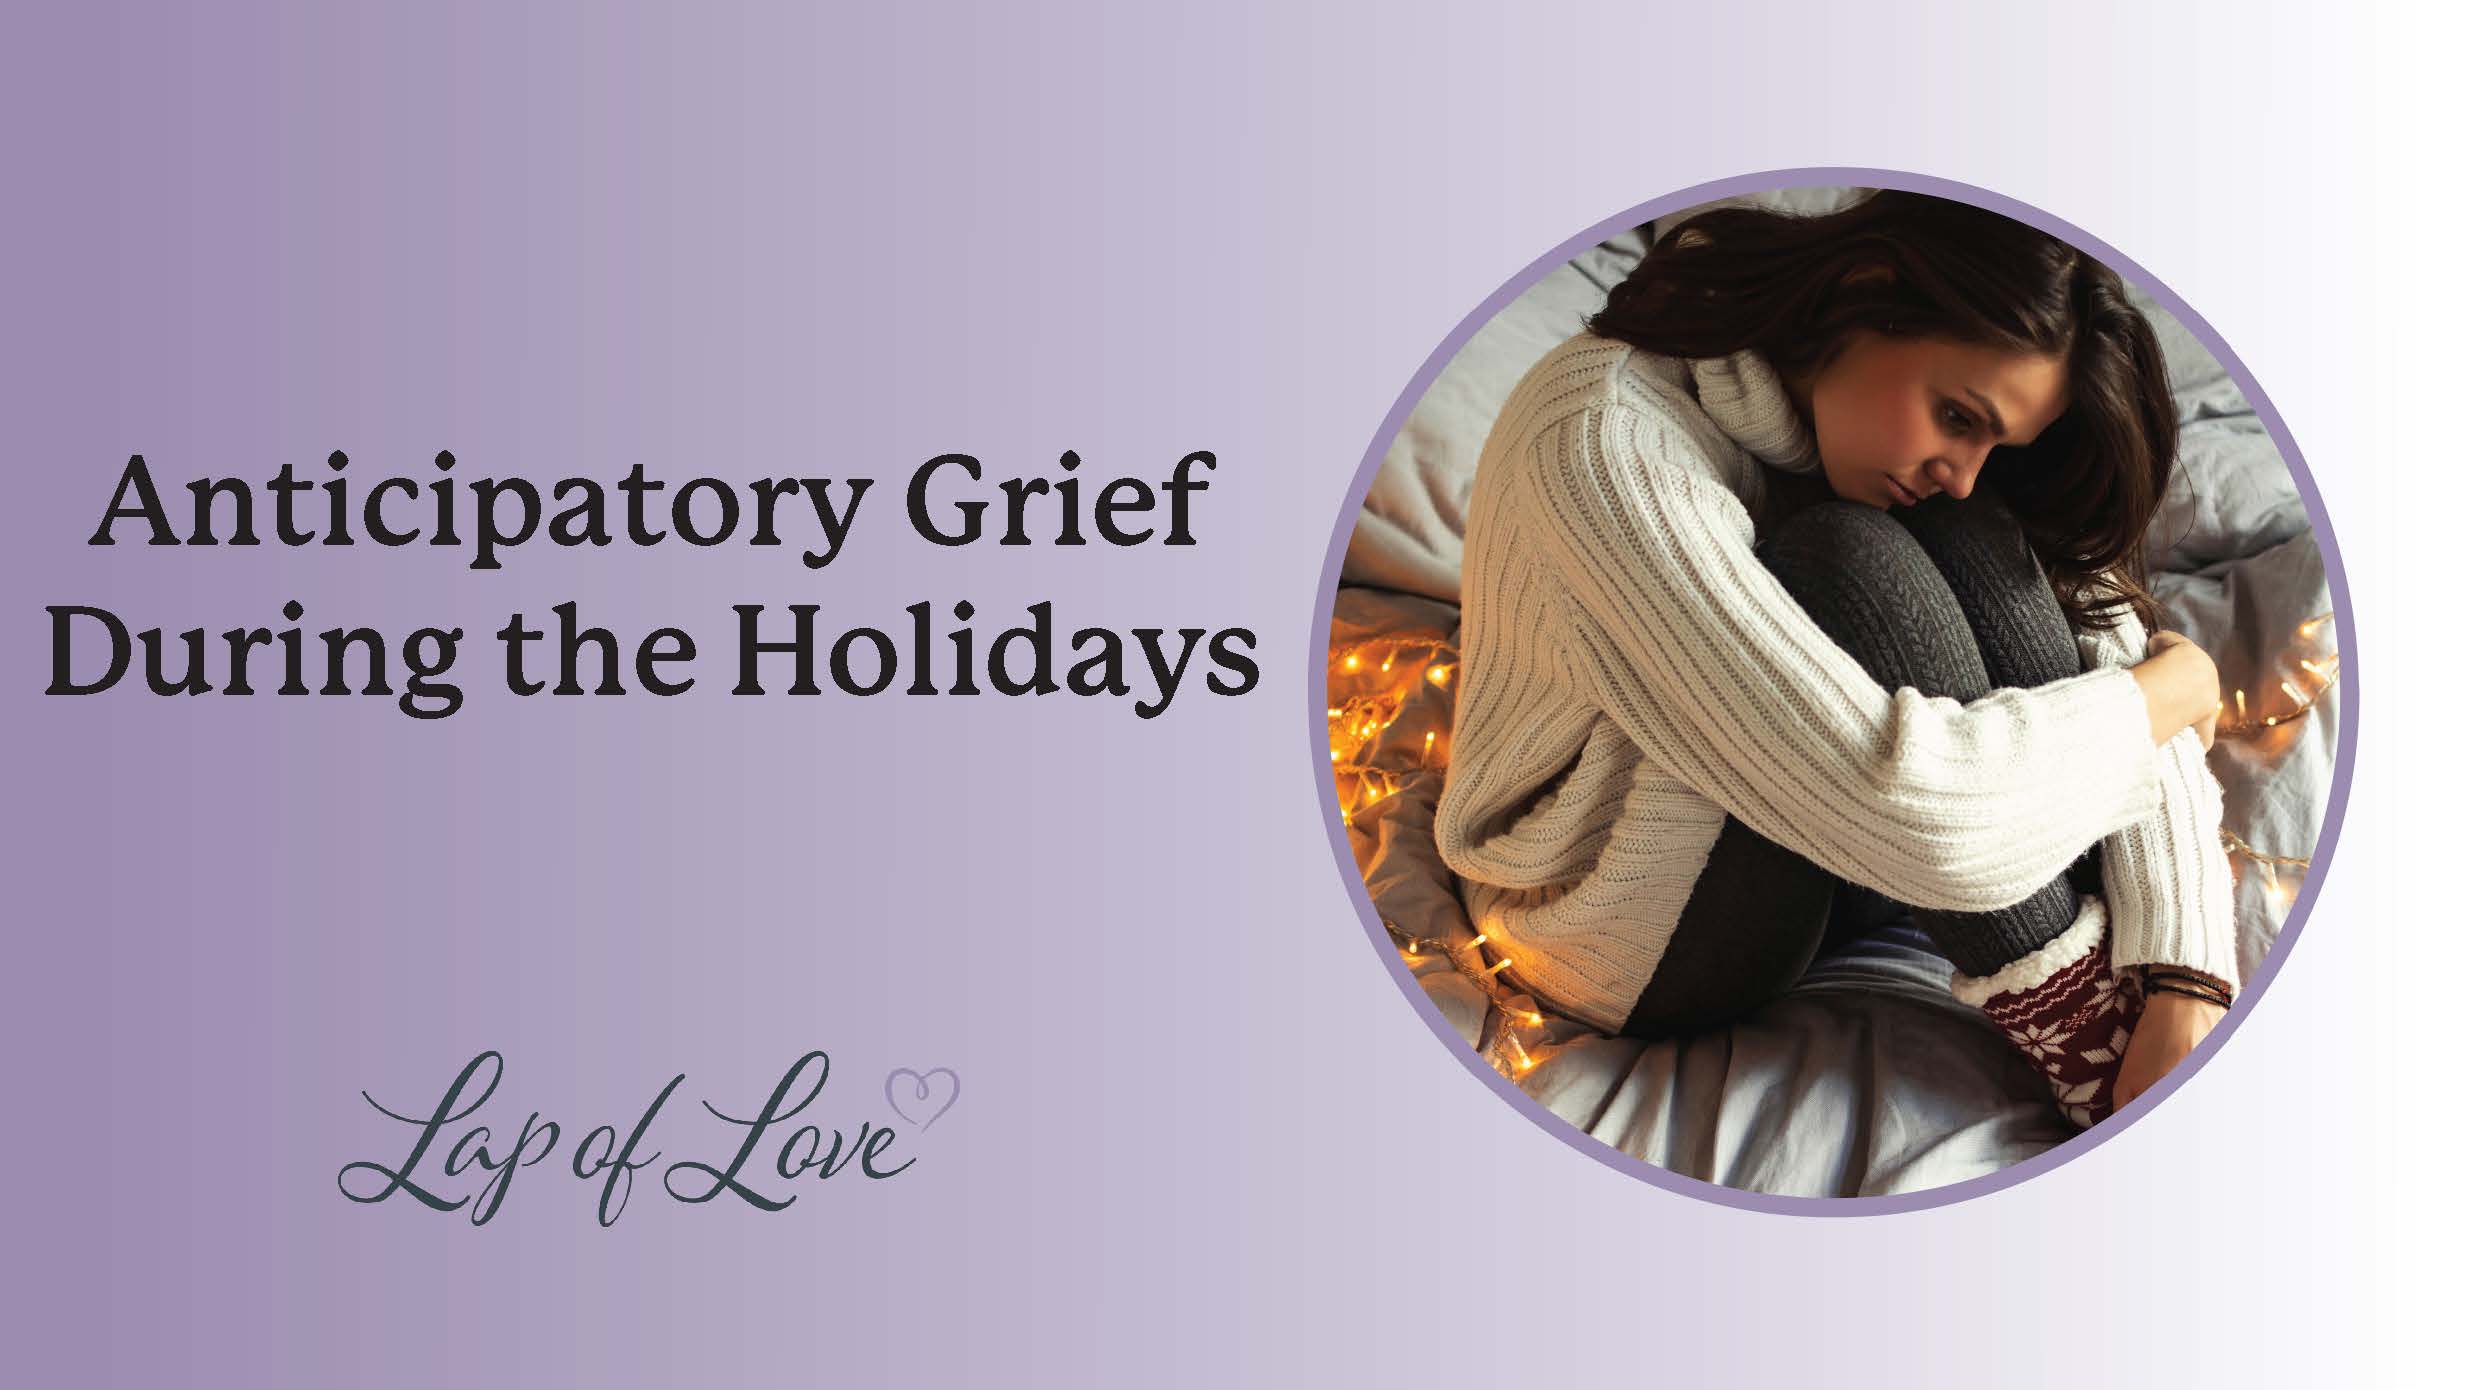 Anticipatory Grief During the Holidays